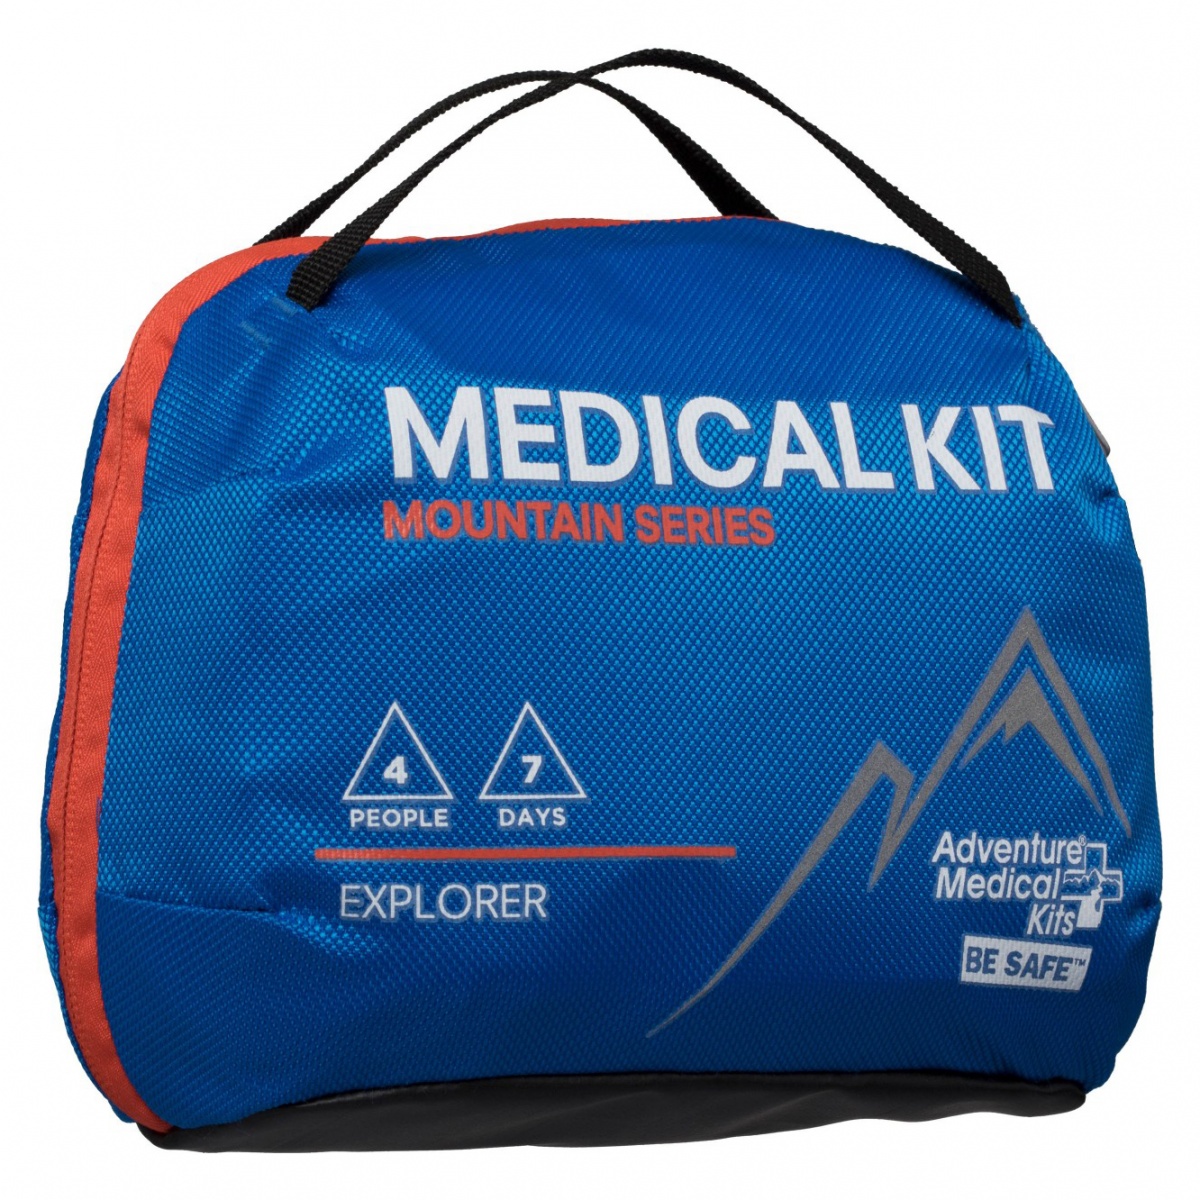 adventure medical kits mountain series explorer first aid kit review